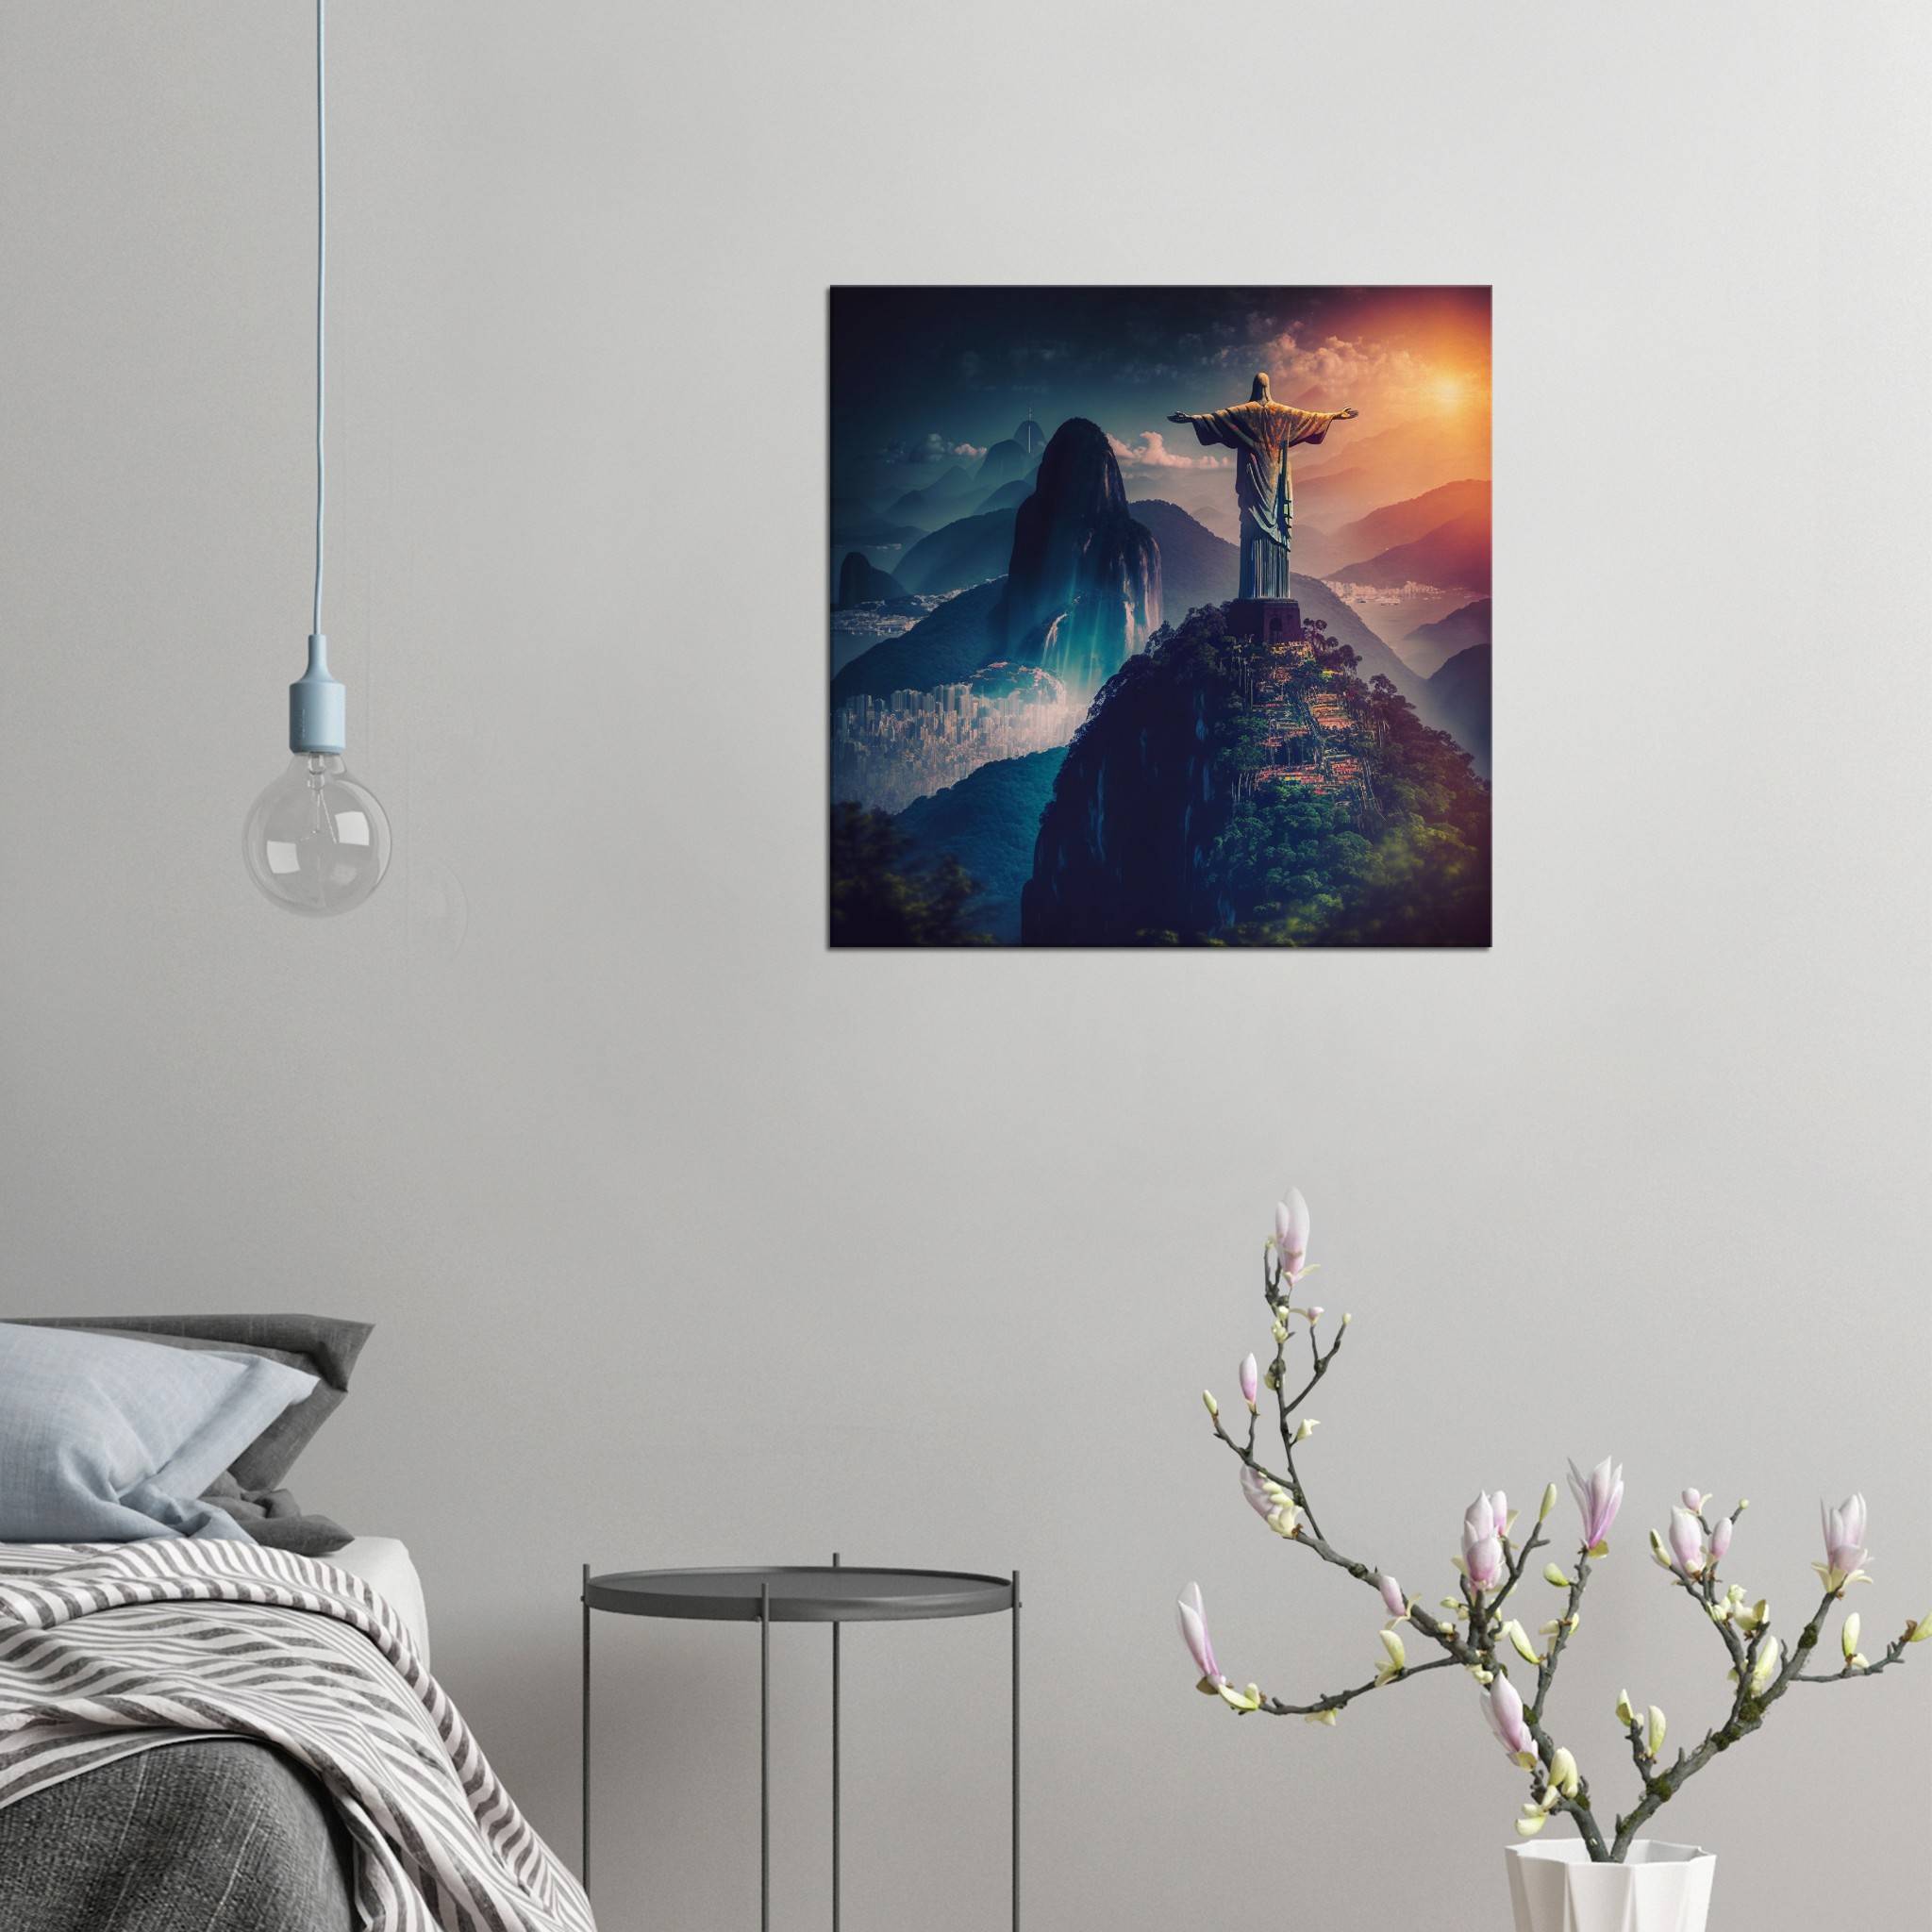 Christ the Redeemer 5 / 60 x 60cm (Canvas Print) Canvas Print Canvas reproduction The Pianist Print On Demand Fabled Gallery https://fabledgallery.art/product/christ-the-redeemer-5-60-x-60cm-canvas-print/